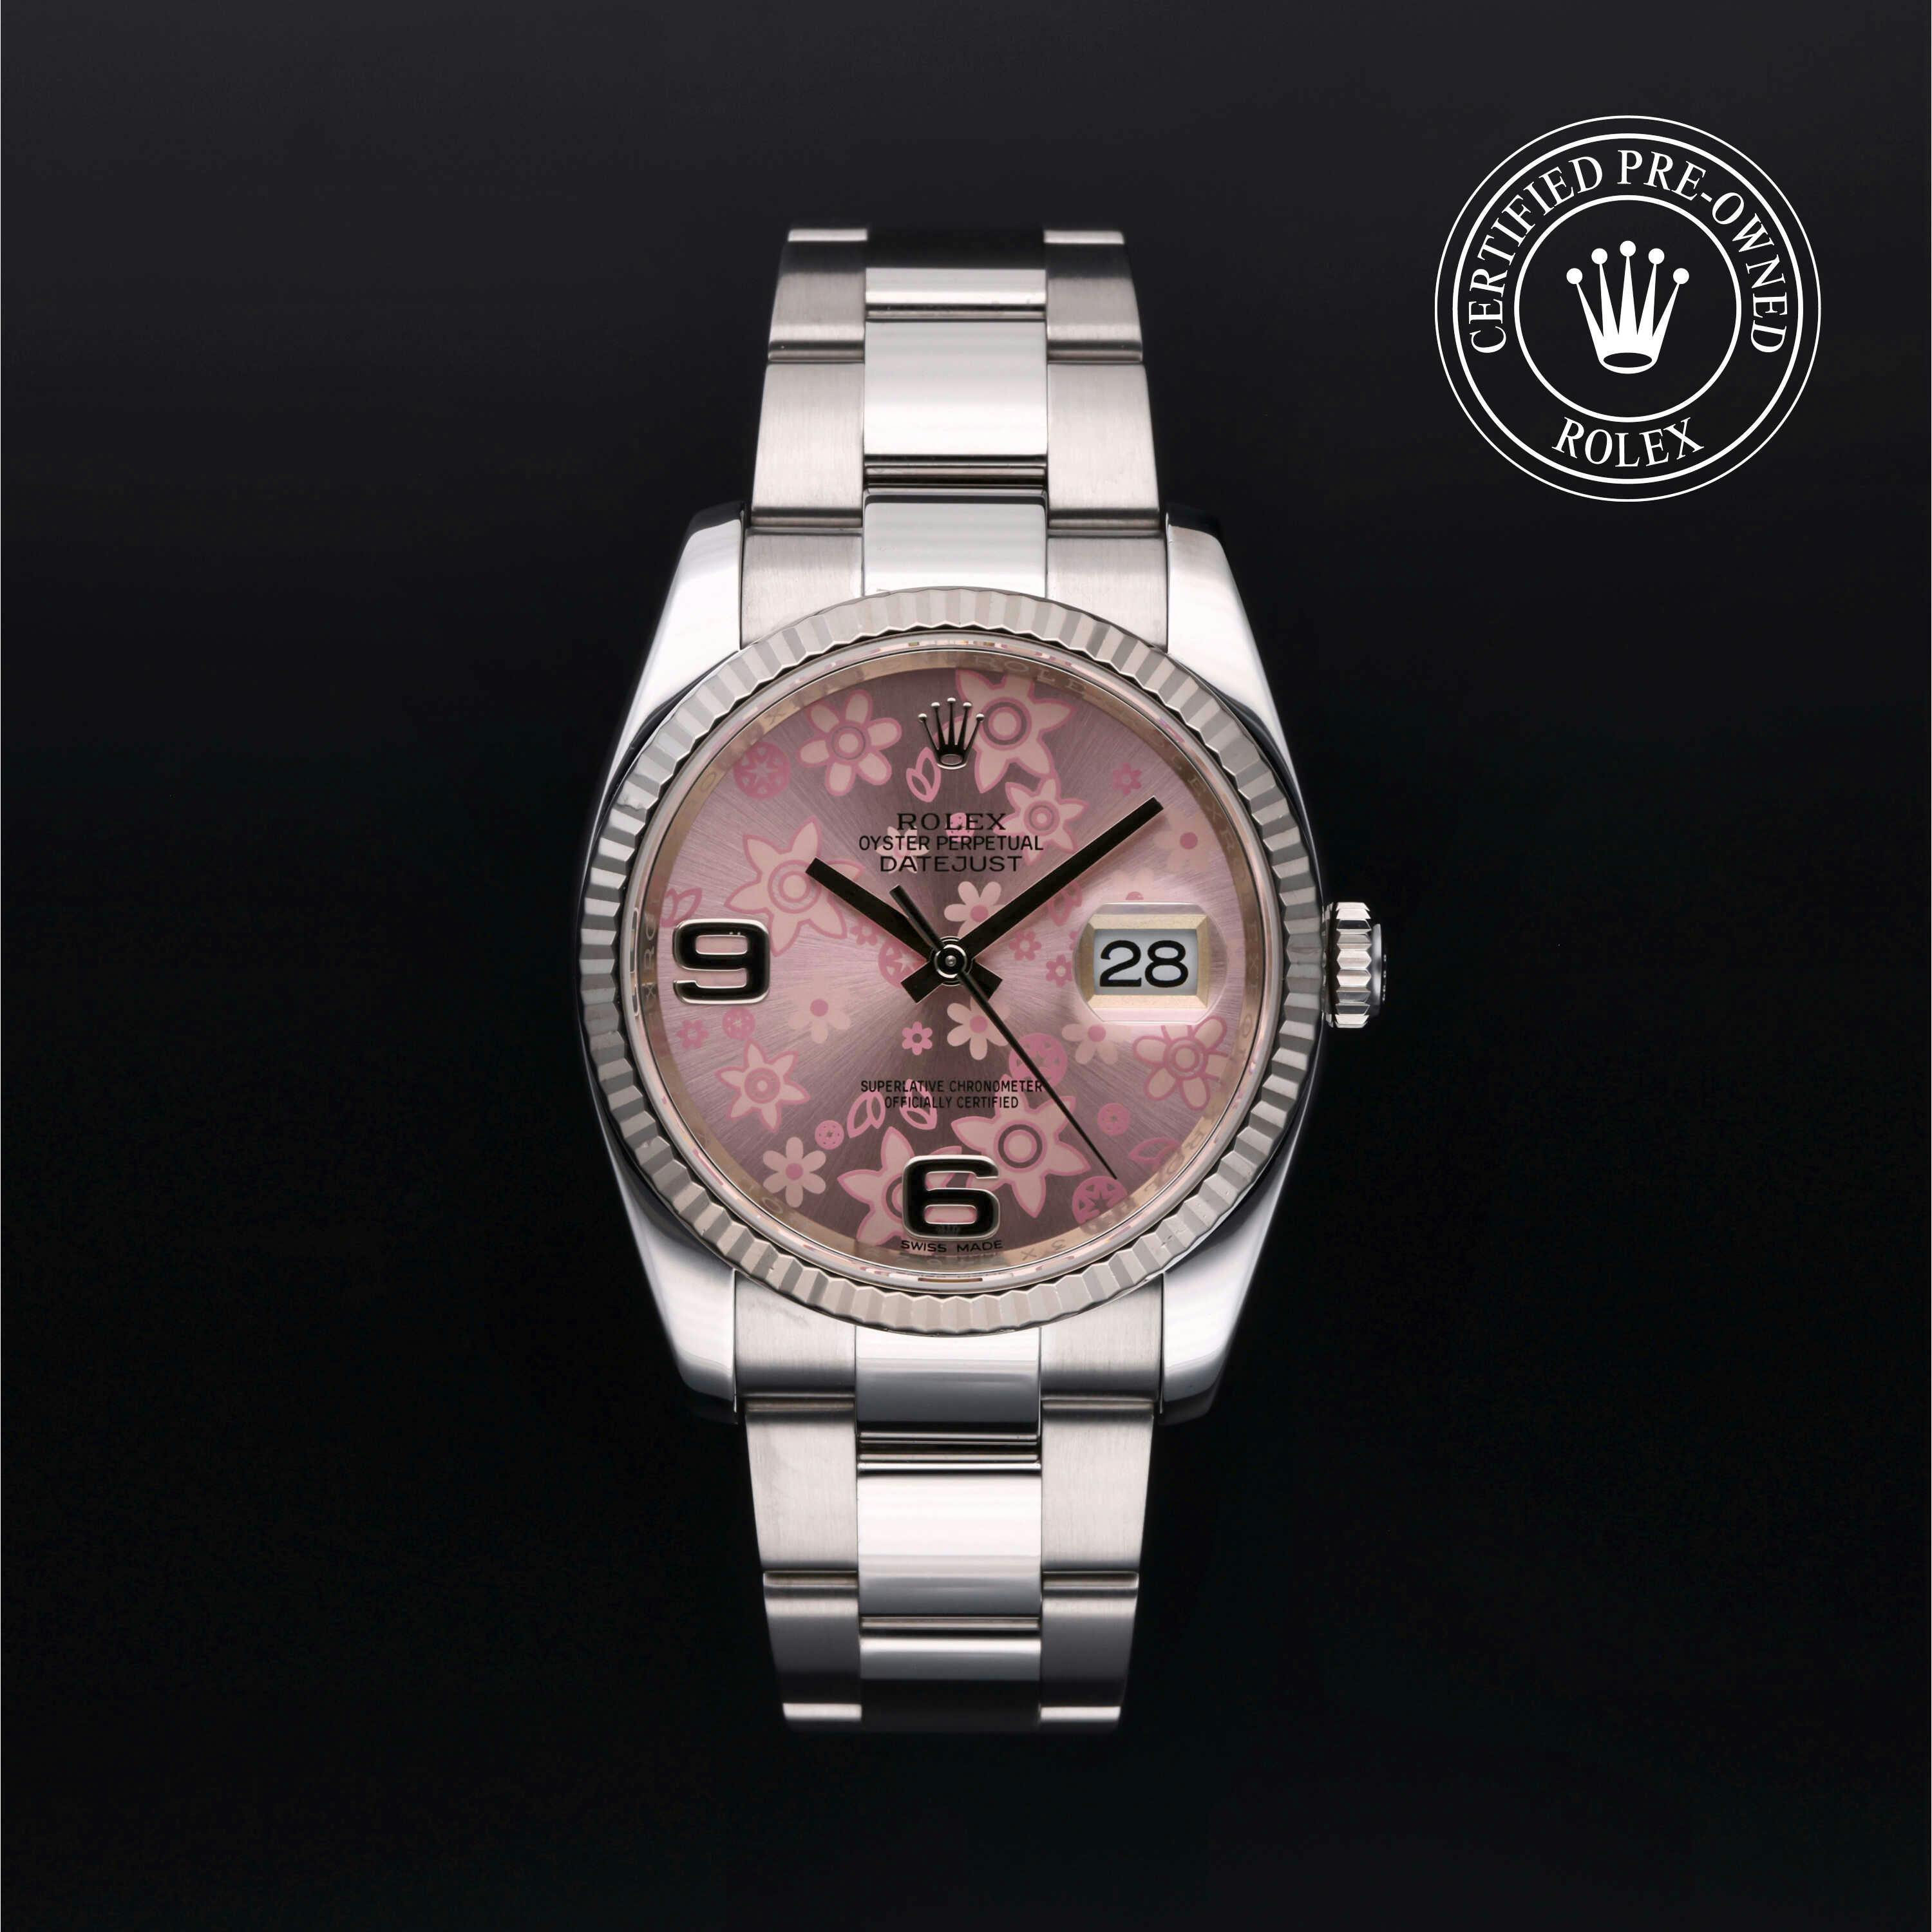 OYSTER PERPETUAL DATEJUST 36